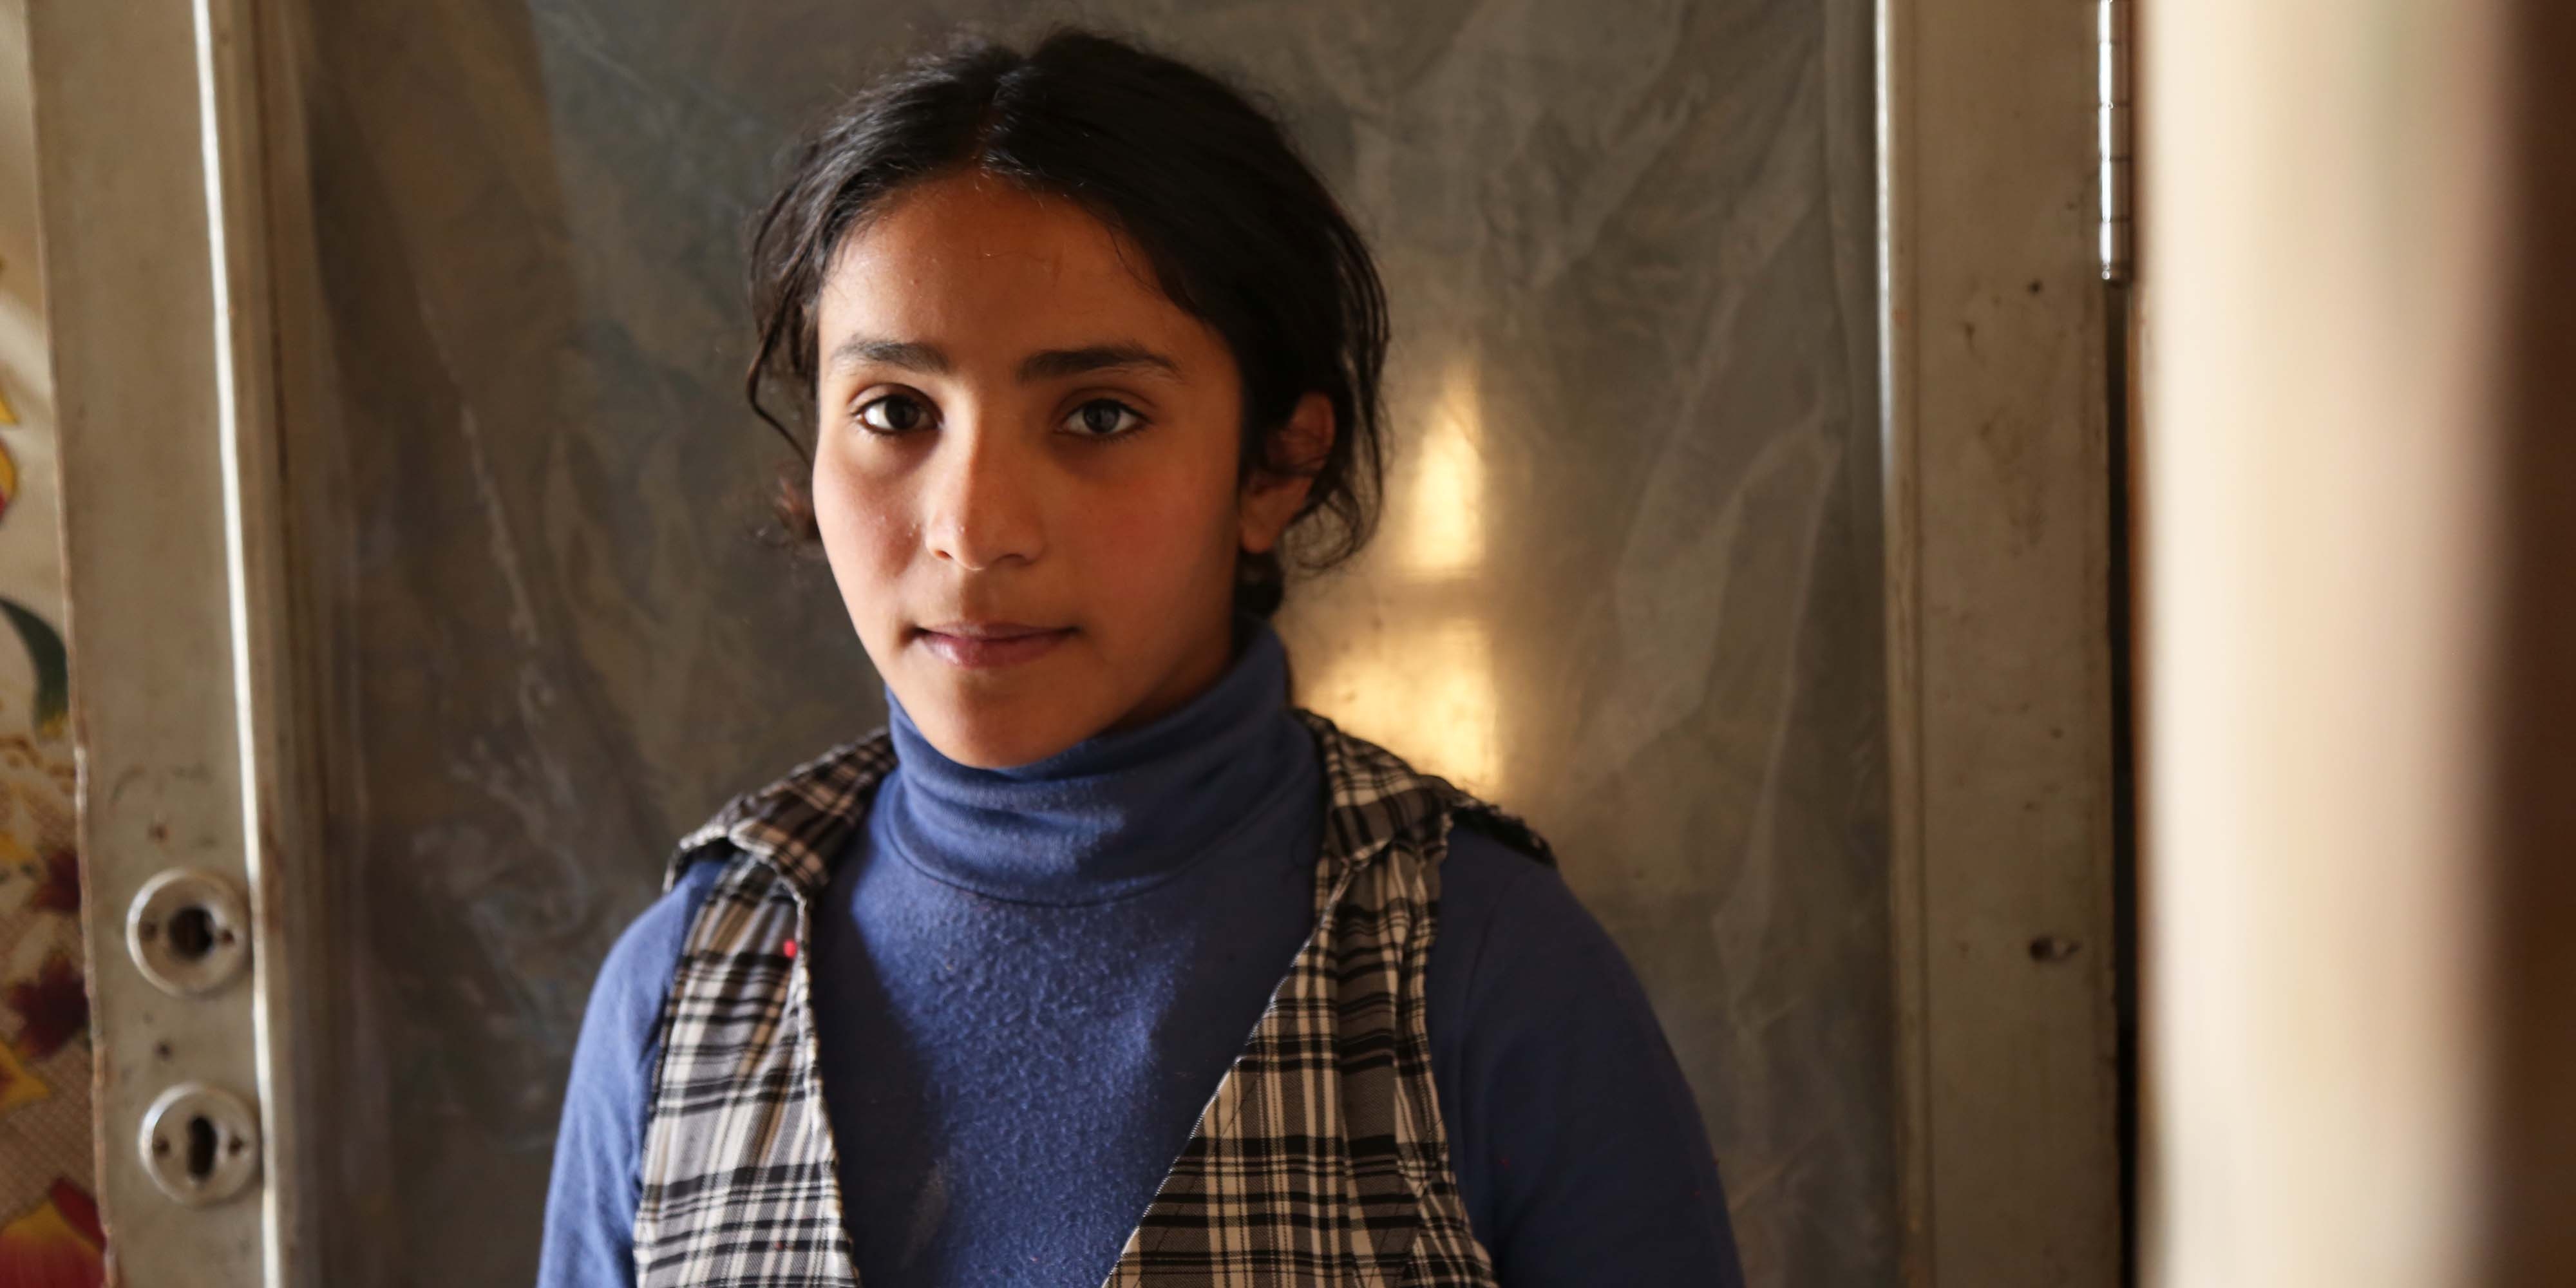 Syria, a girl in a blue turtleneck looks into the camera